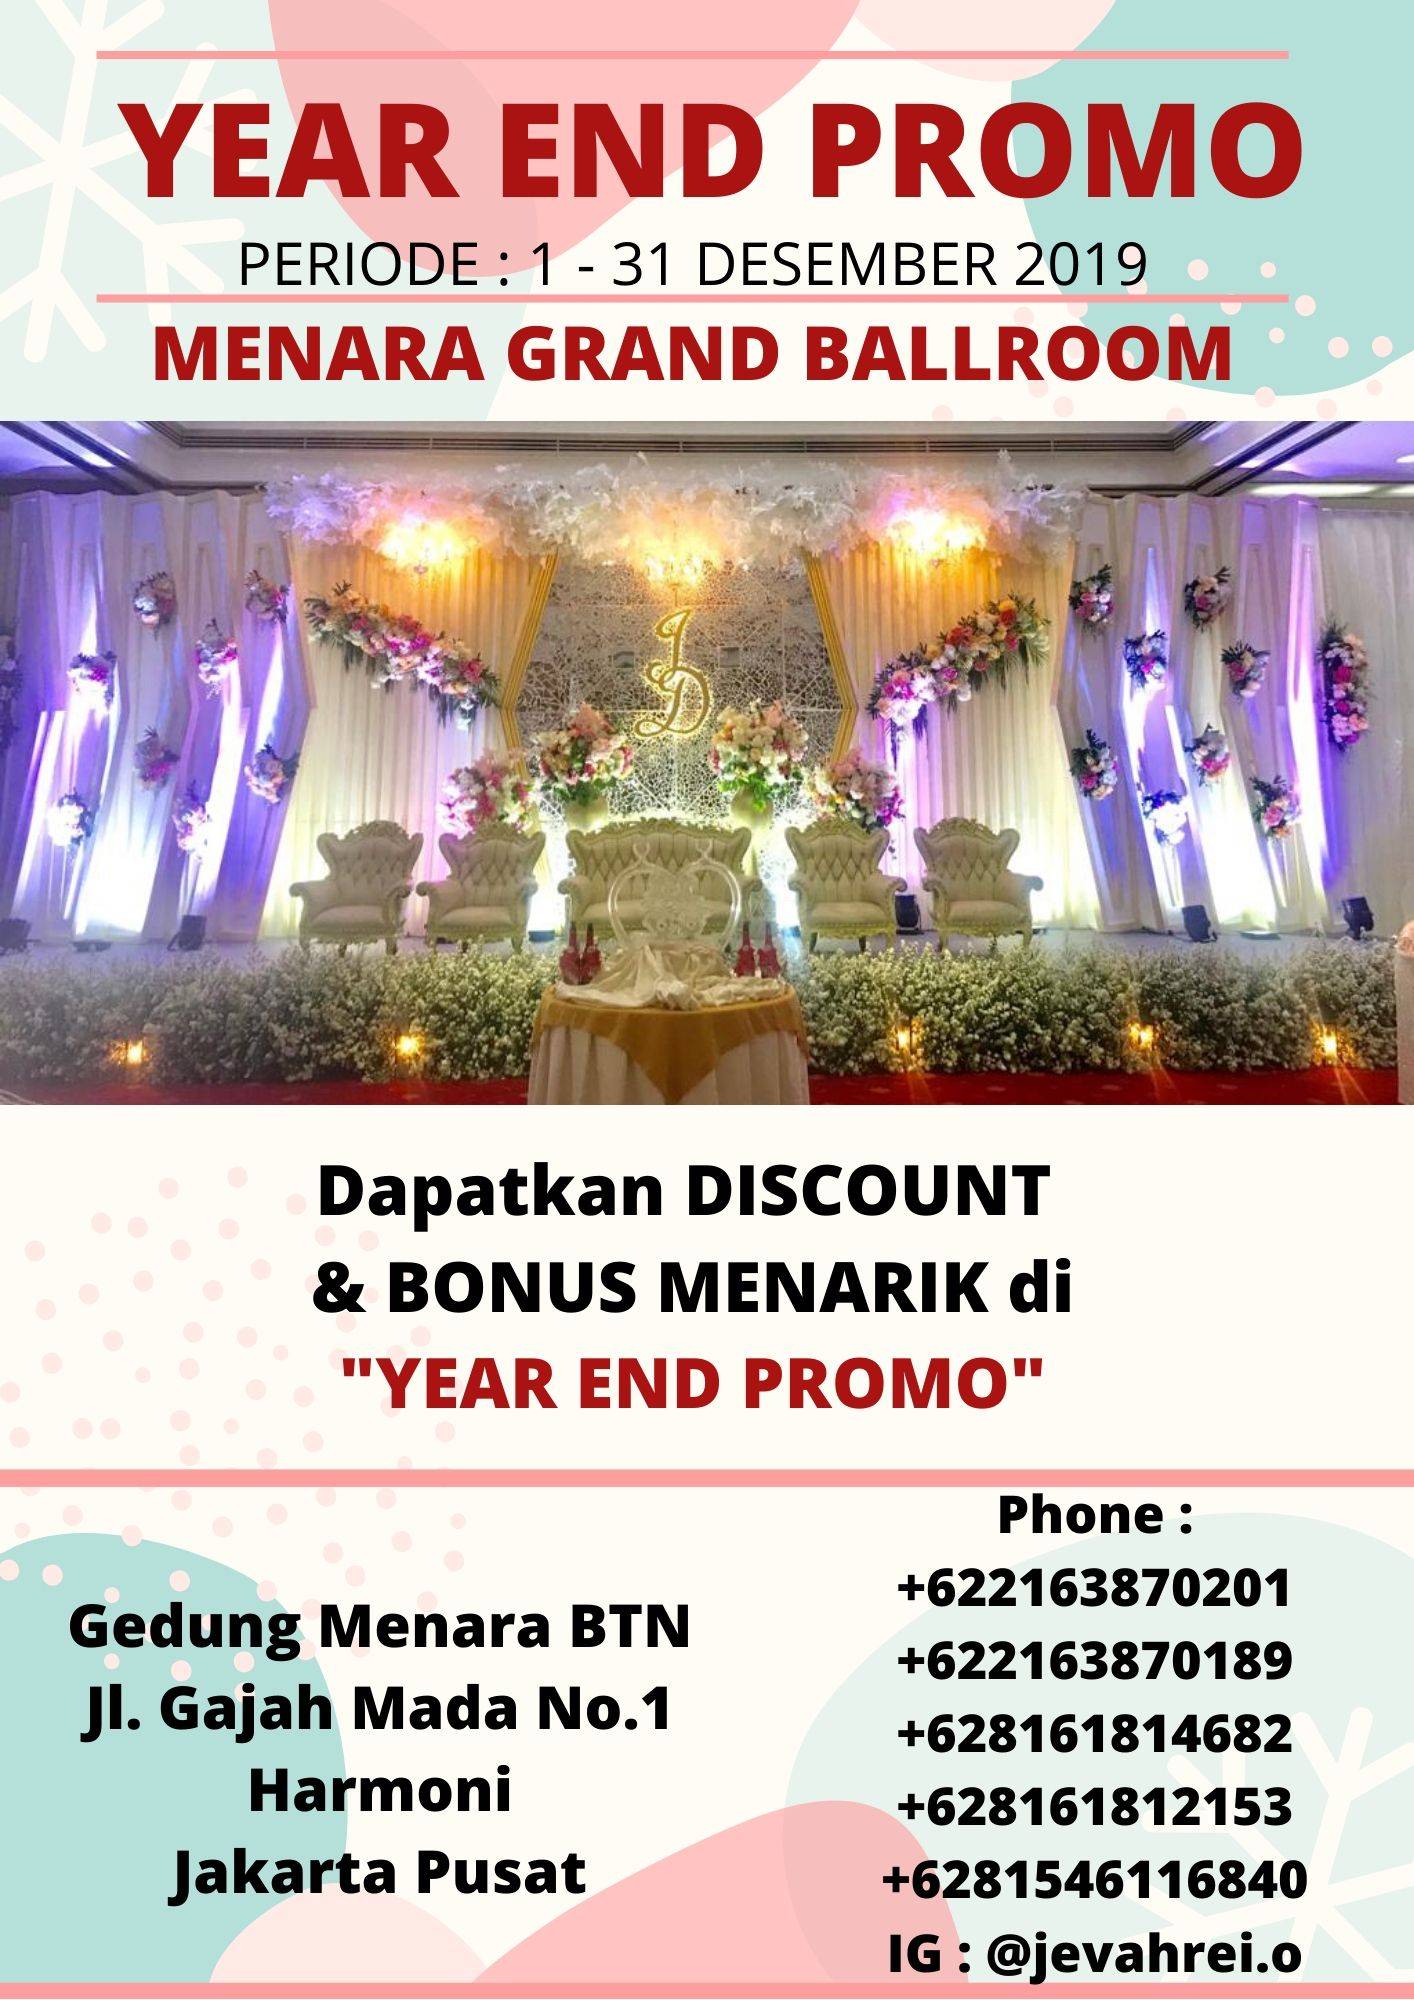 YEAR END PROMO